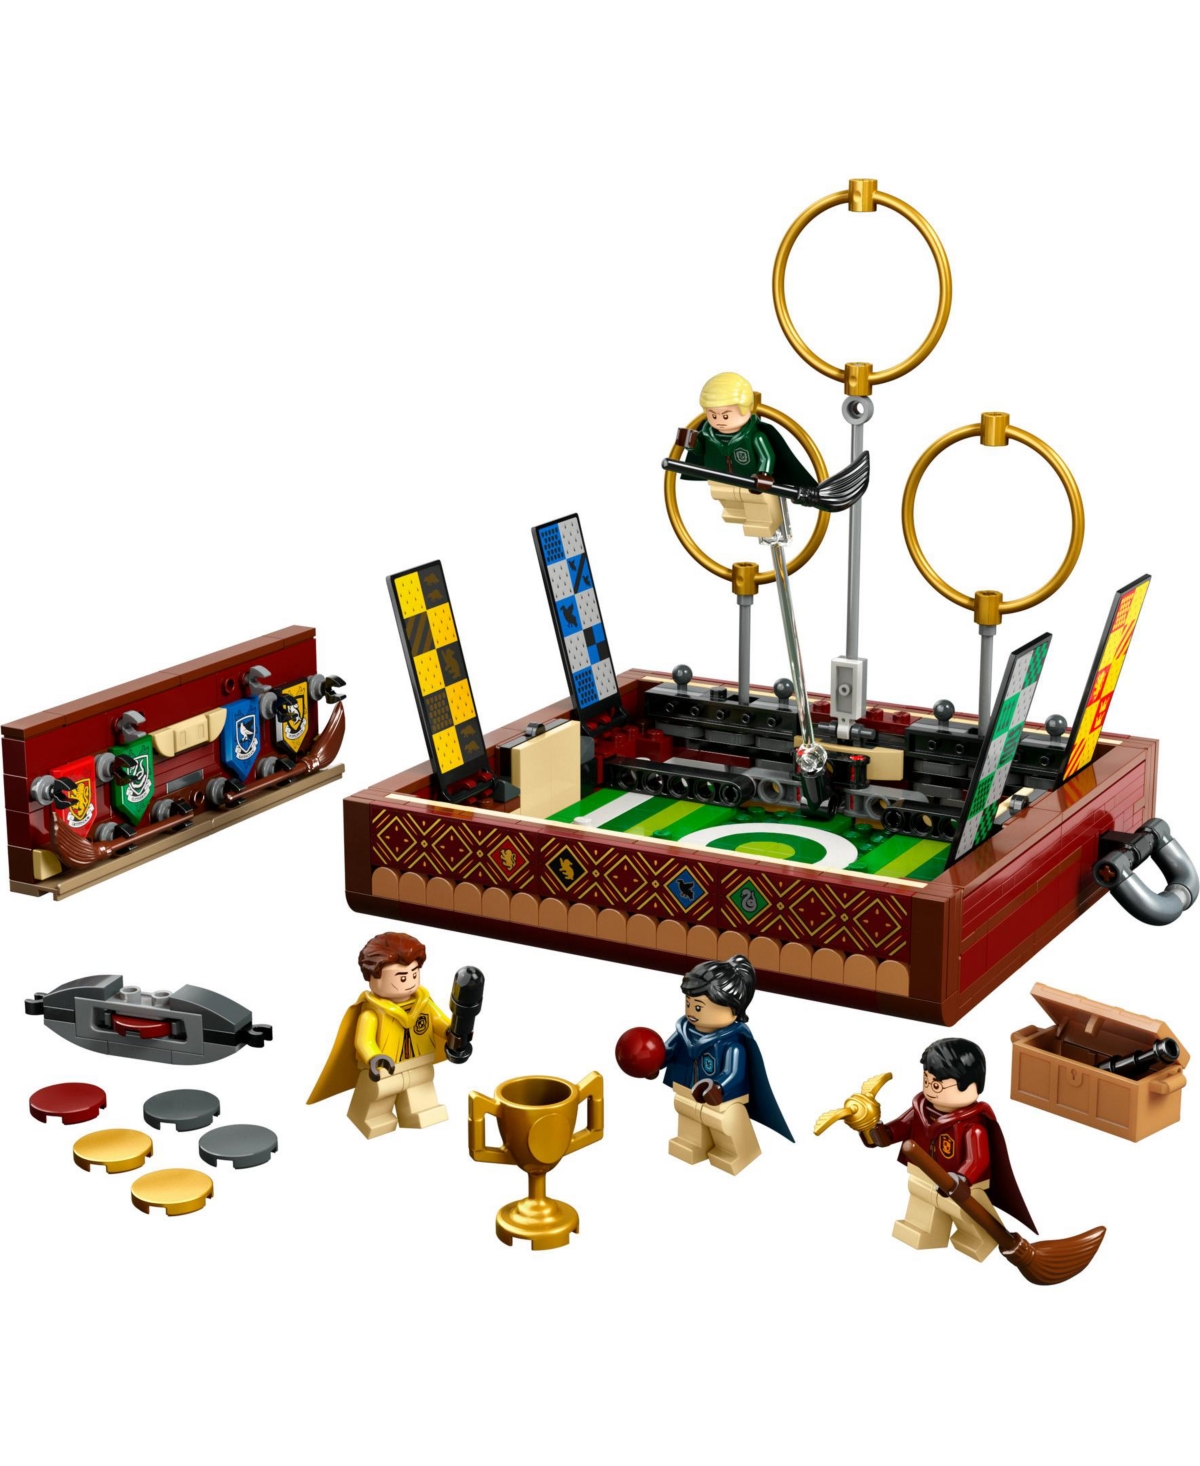 Shop Lego Harry Potter 76416 Quidditch Trunk Toy Building Set In Multicolor